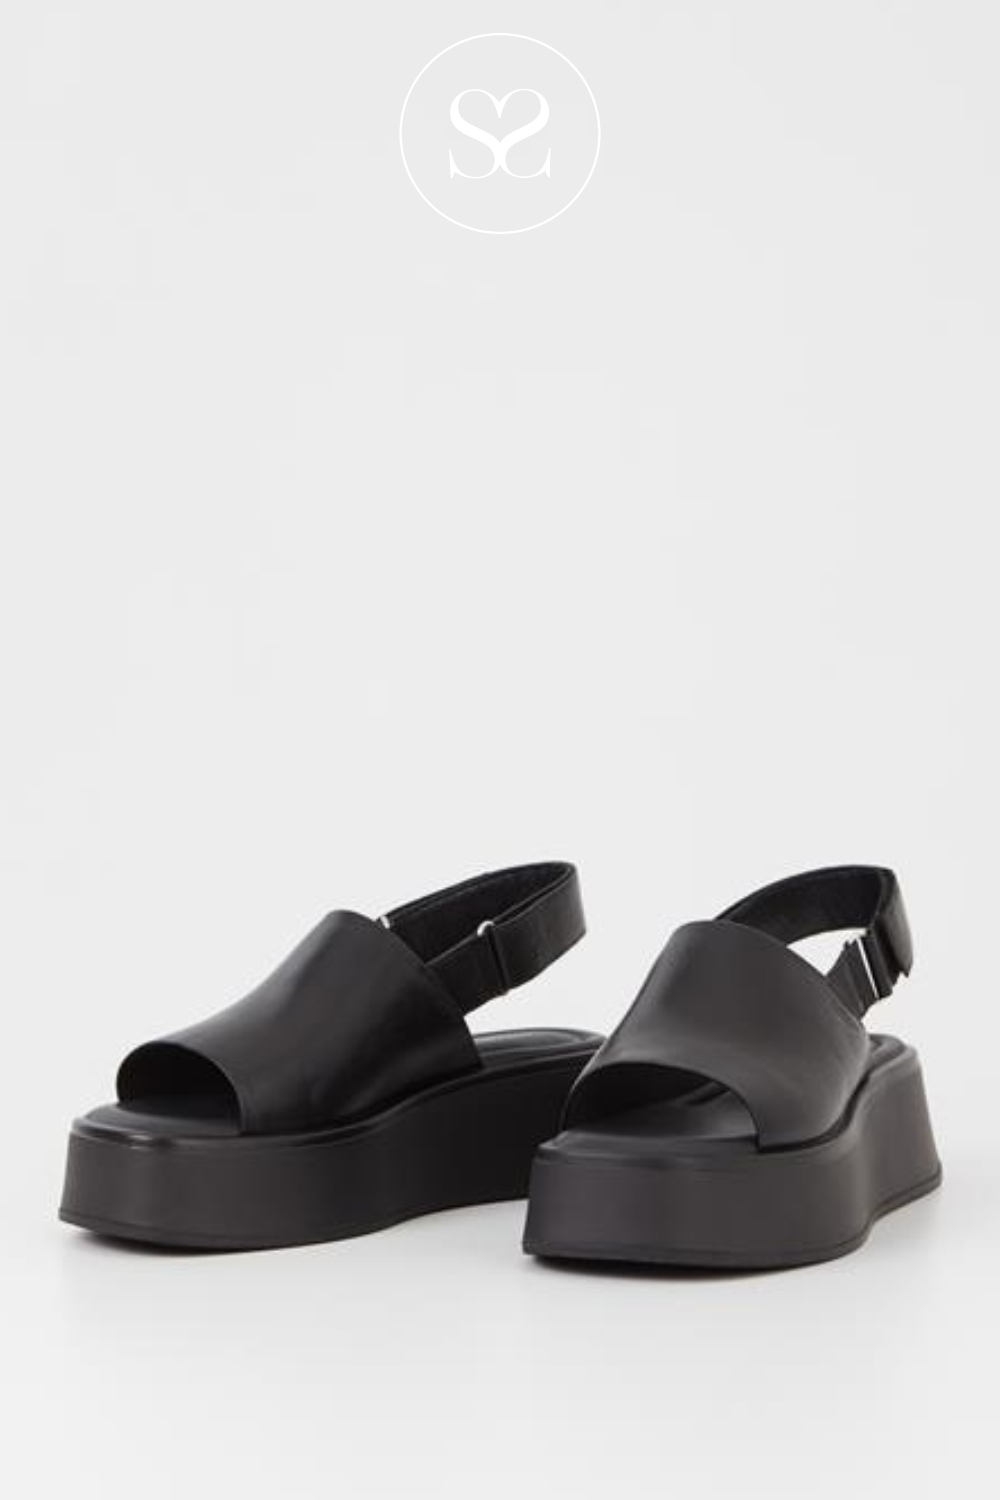 black leather chunky sandals with slingback from Vagabond